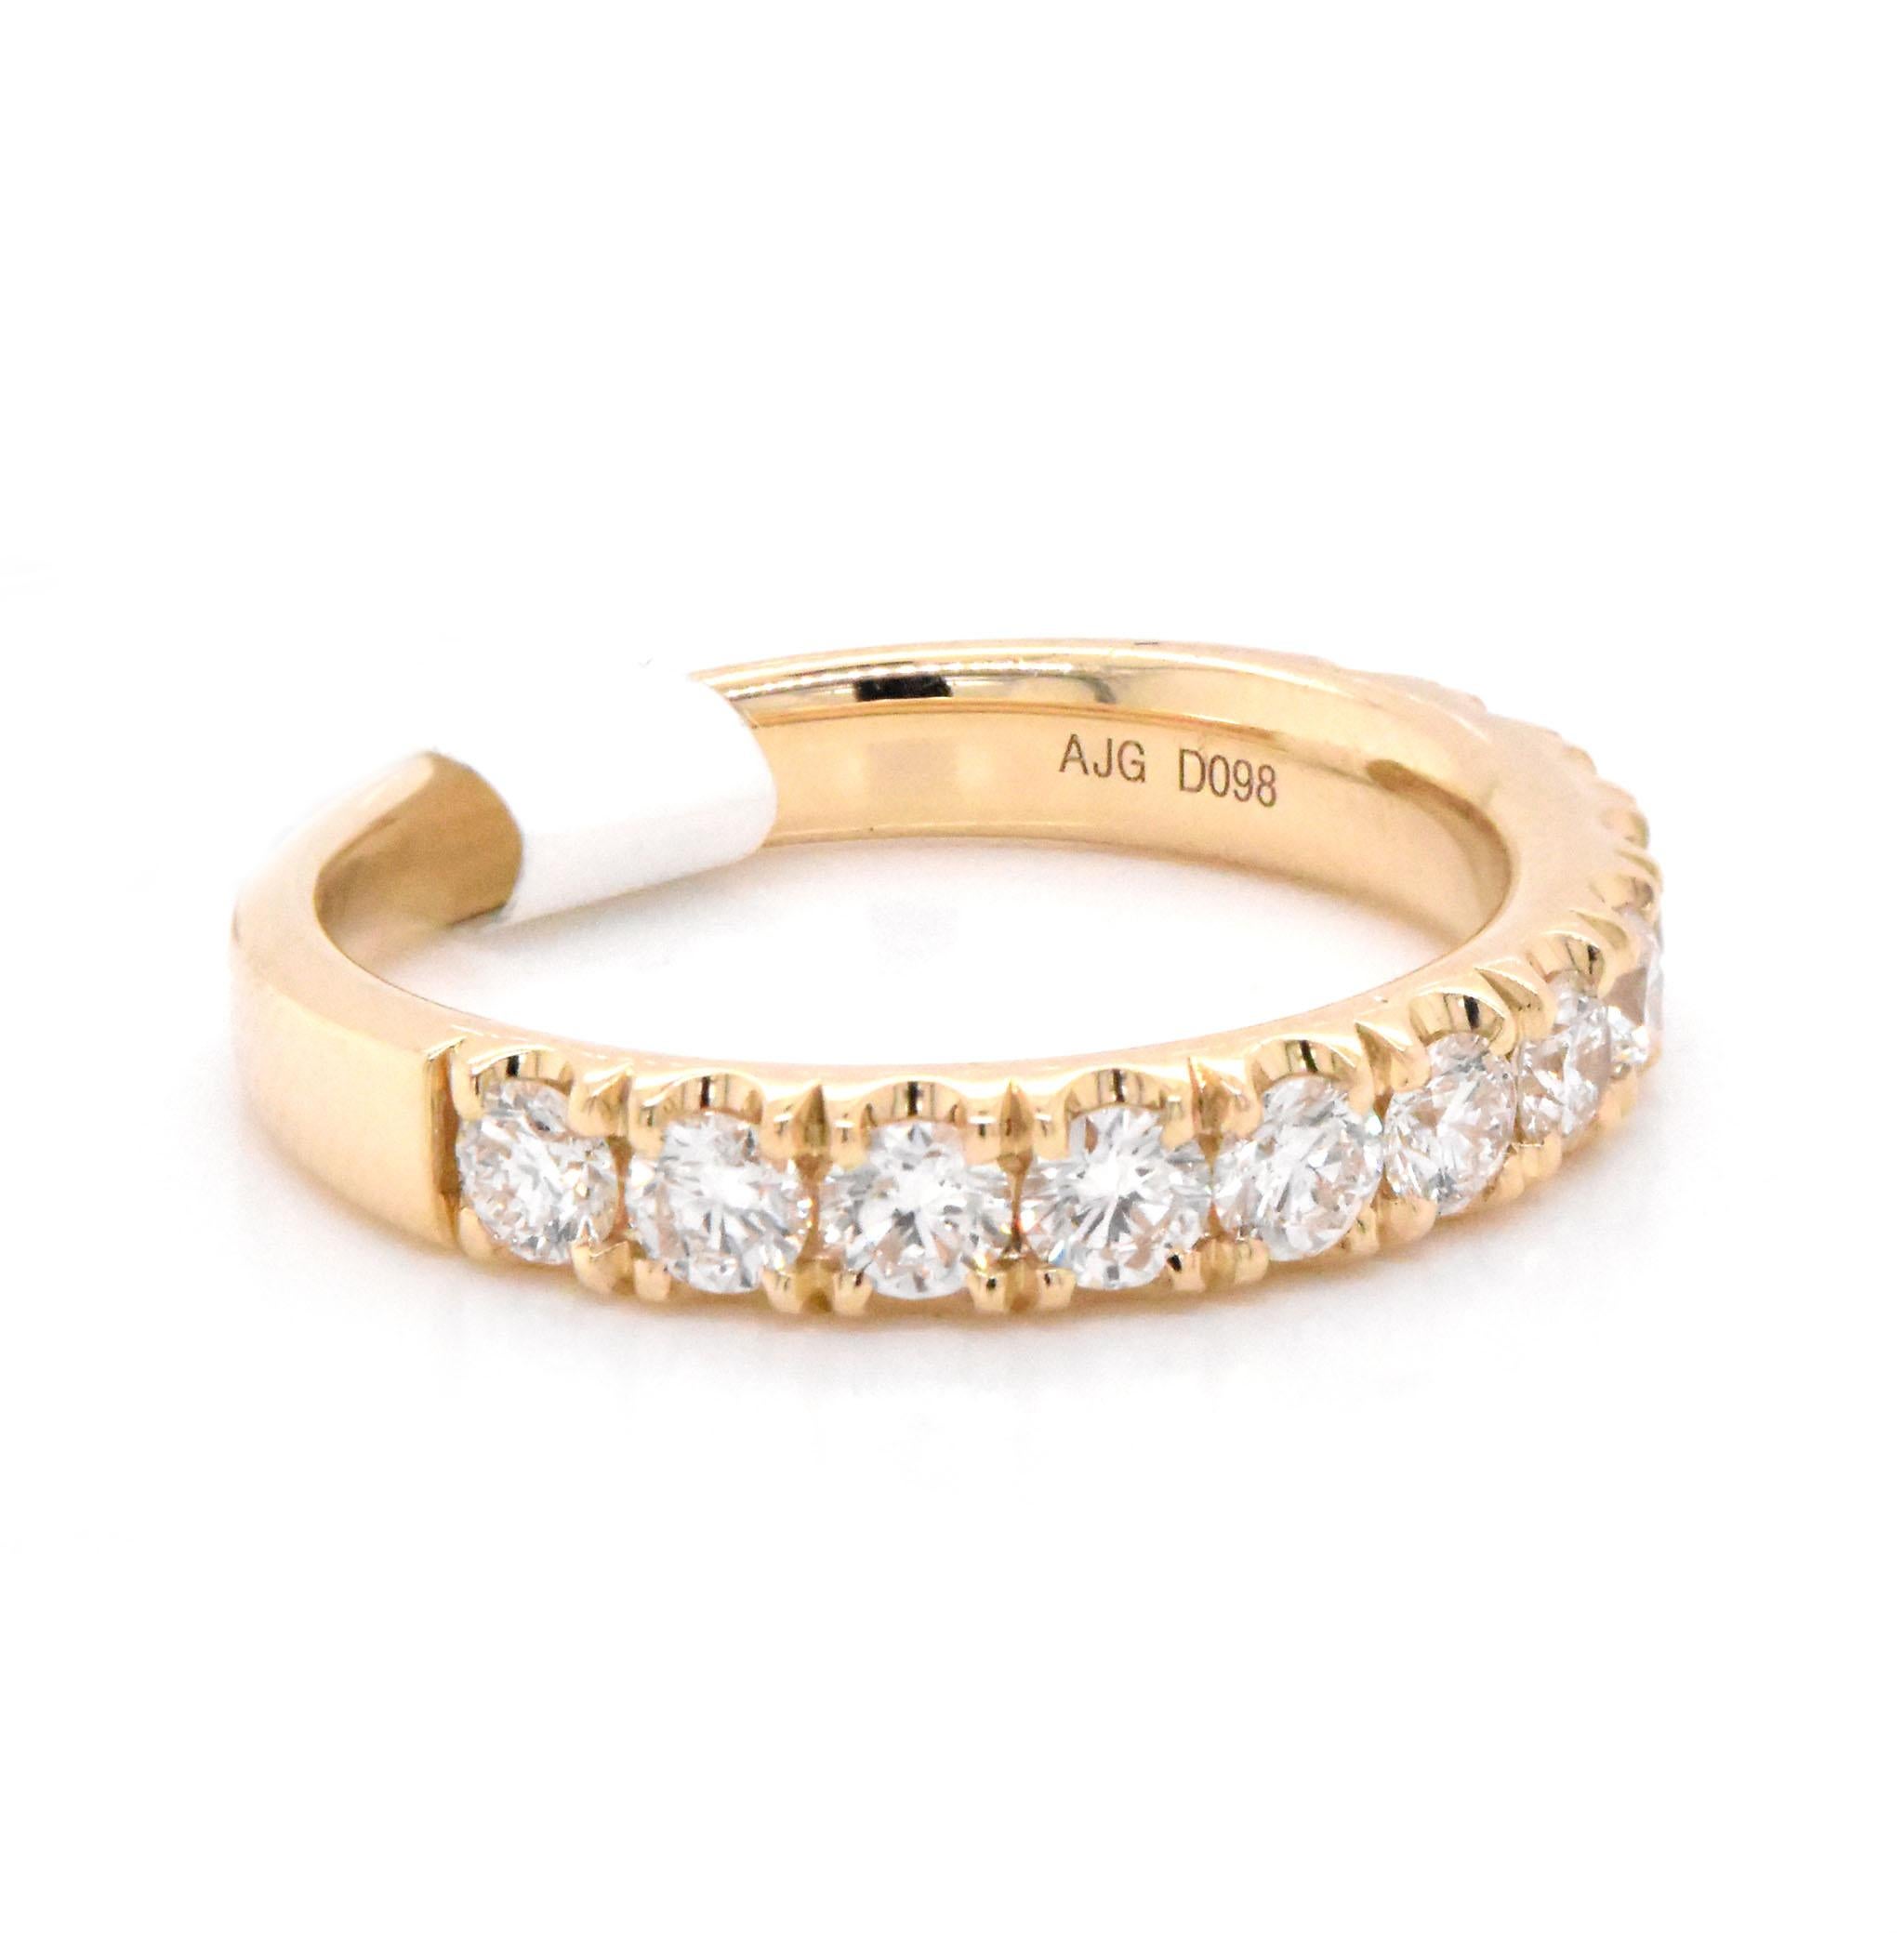 Designer: custom
Material: 14k yellow gold
Diamonds: 12 round cut = 1.00cttw
Color: G
Clarity: VS
Size: 7 (please allow two additional shipping days for sizing requests)  
Dimensions: ring measures 3.5mm in width
Weight: 3.91 grams
